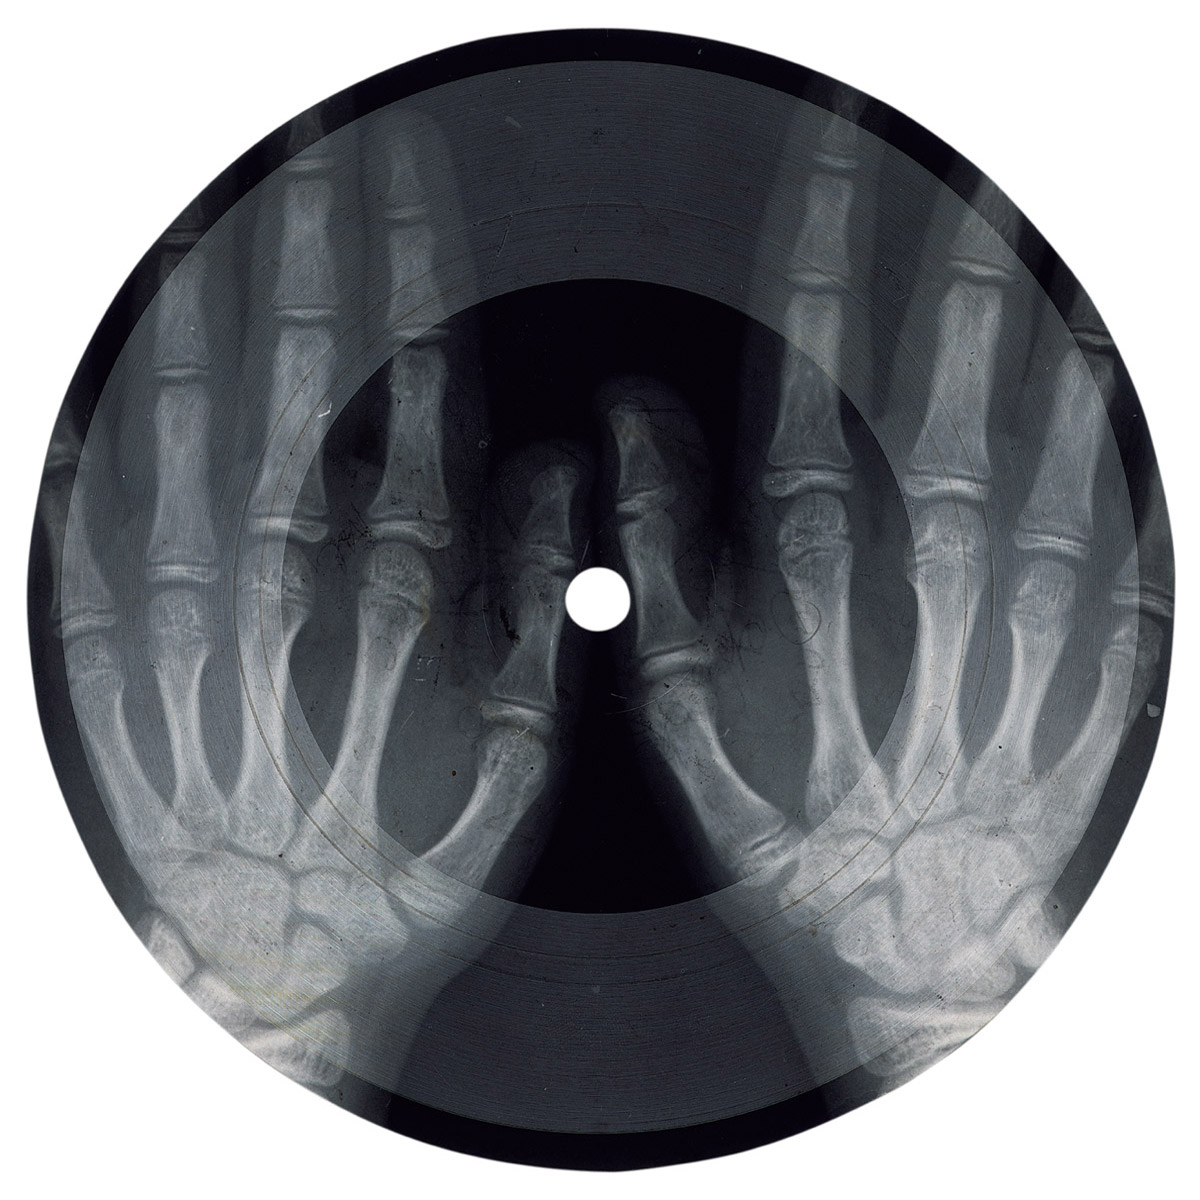 A photograph of a mid twentieth century record fashioned from a discarded X-ray of hands.